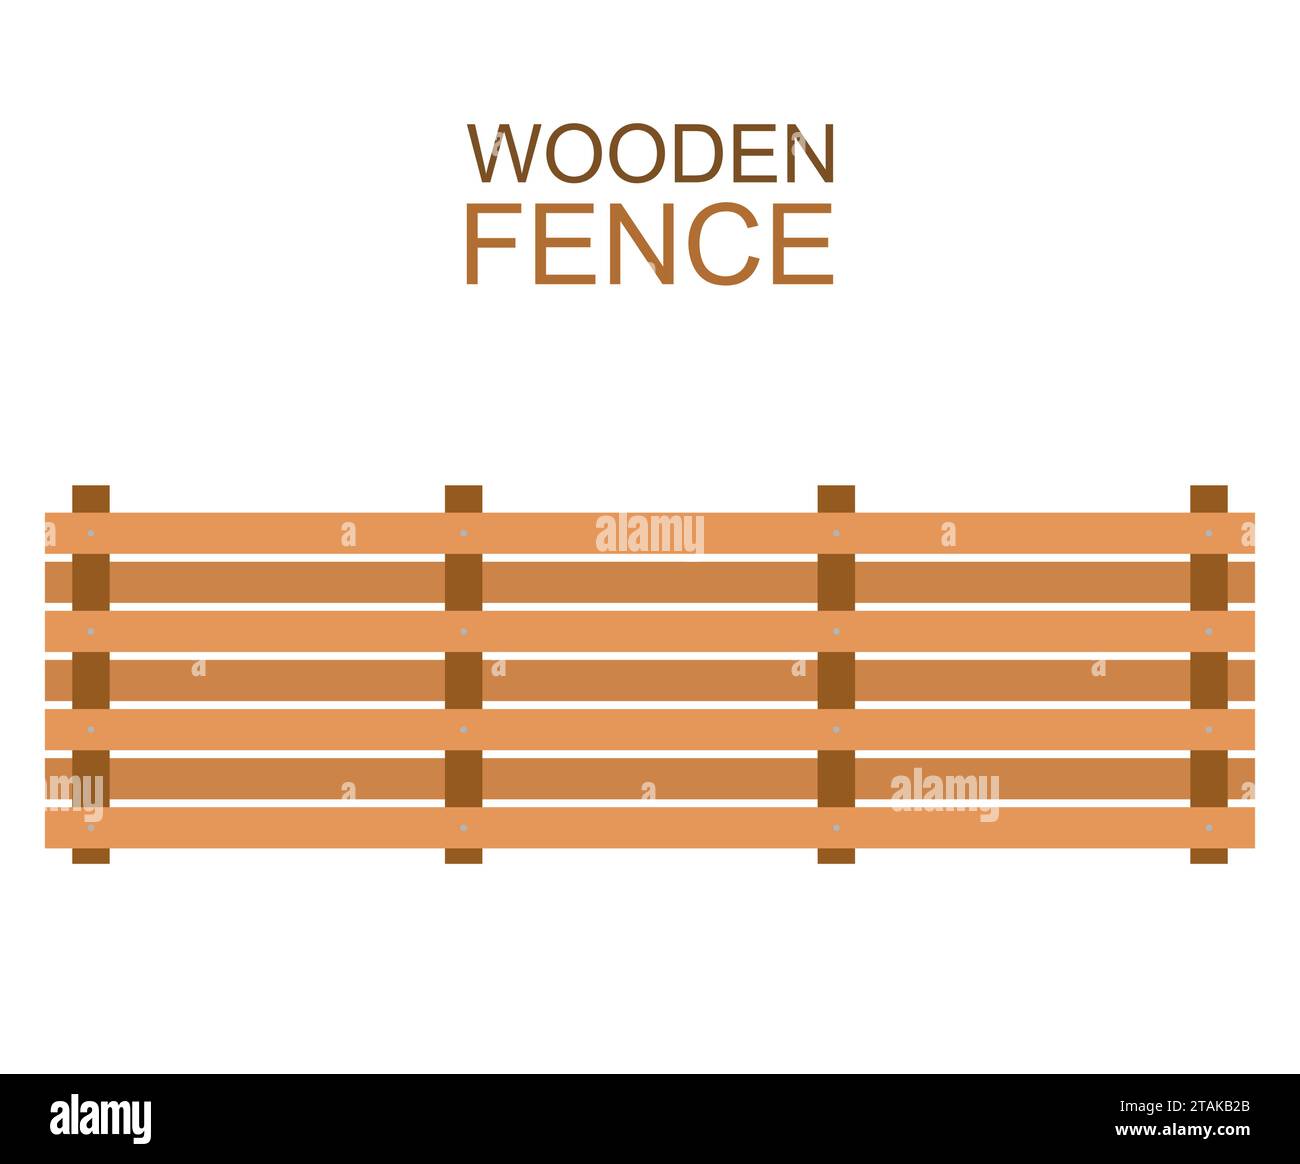 Wooden fence isolated on white background. Farm fence vector illustration. Boards fence wood silhouette construction in flat style Stock Vector